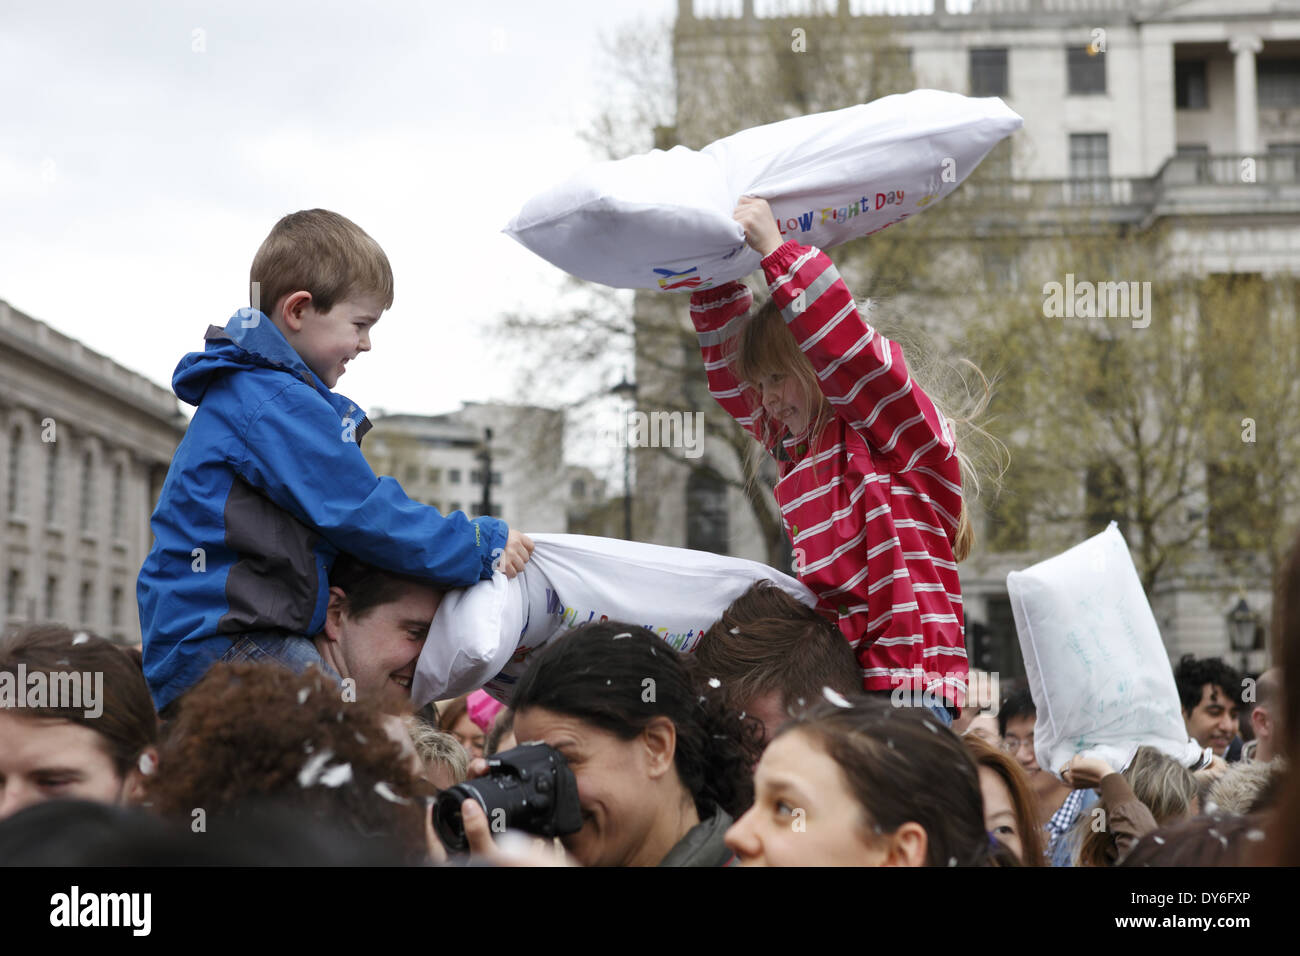 The annual International Pillow Fight flash mob held at Trafalgar Square in London on the 5th April, England, UK Stock Photo